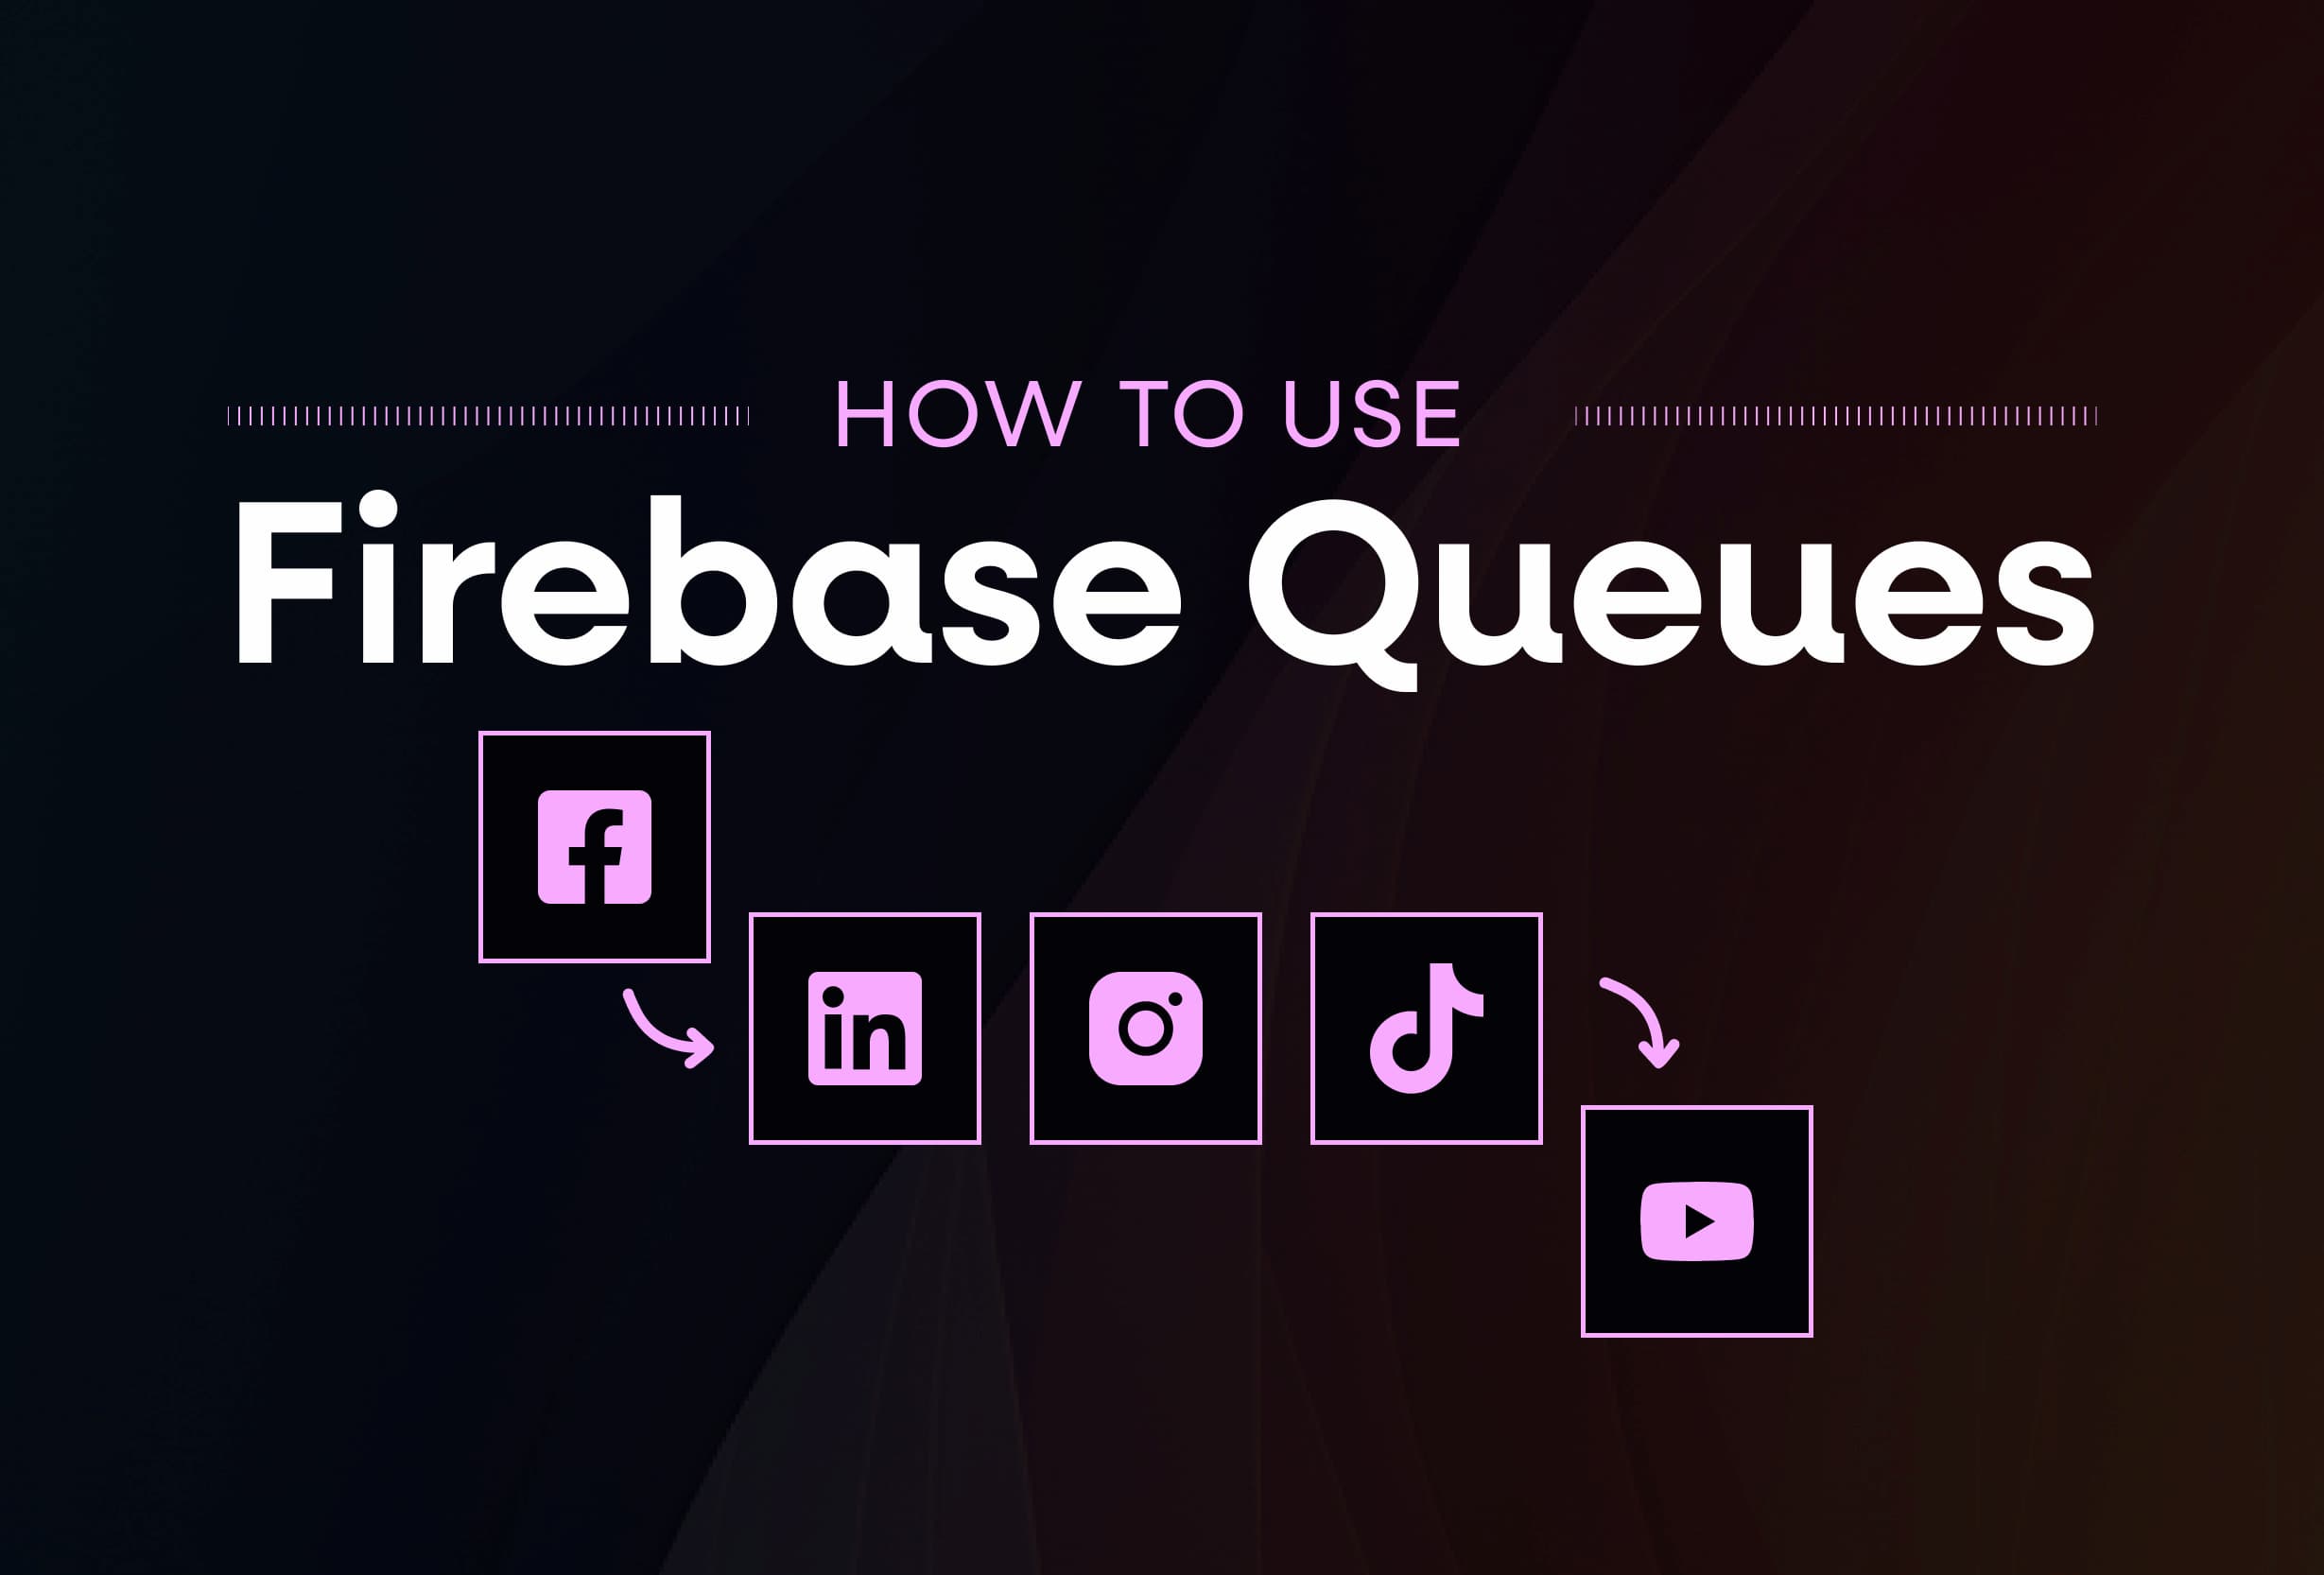 How to use firebase queues.